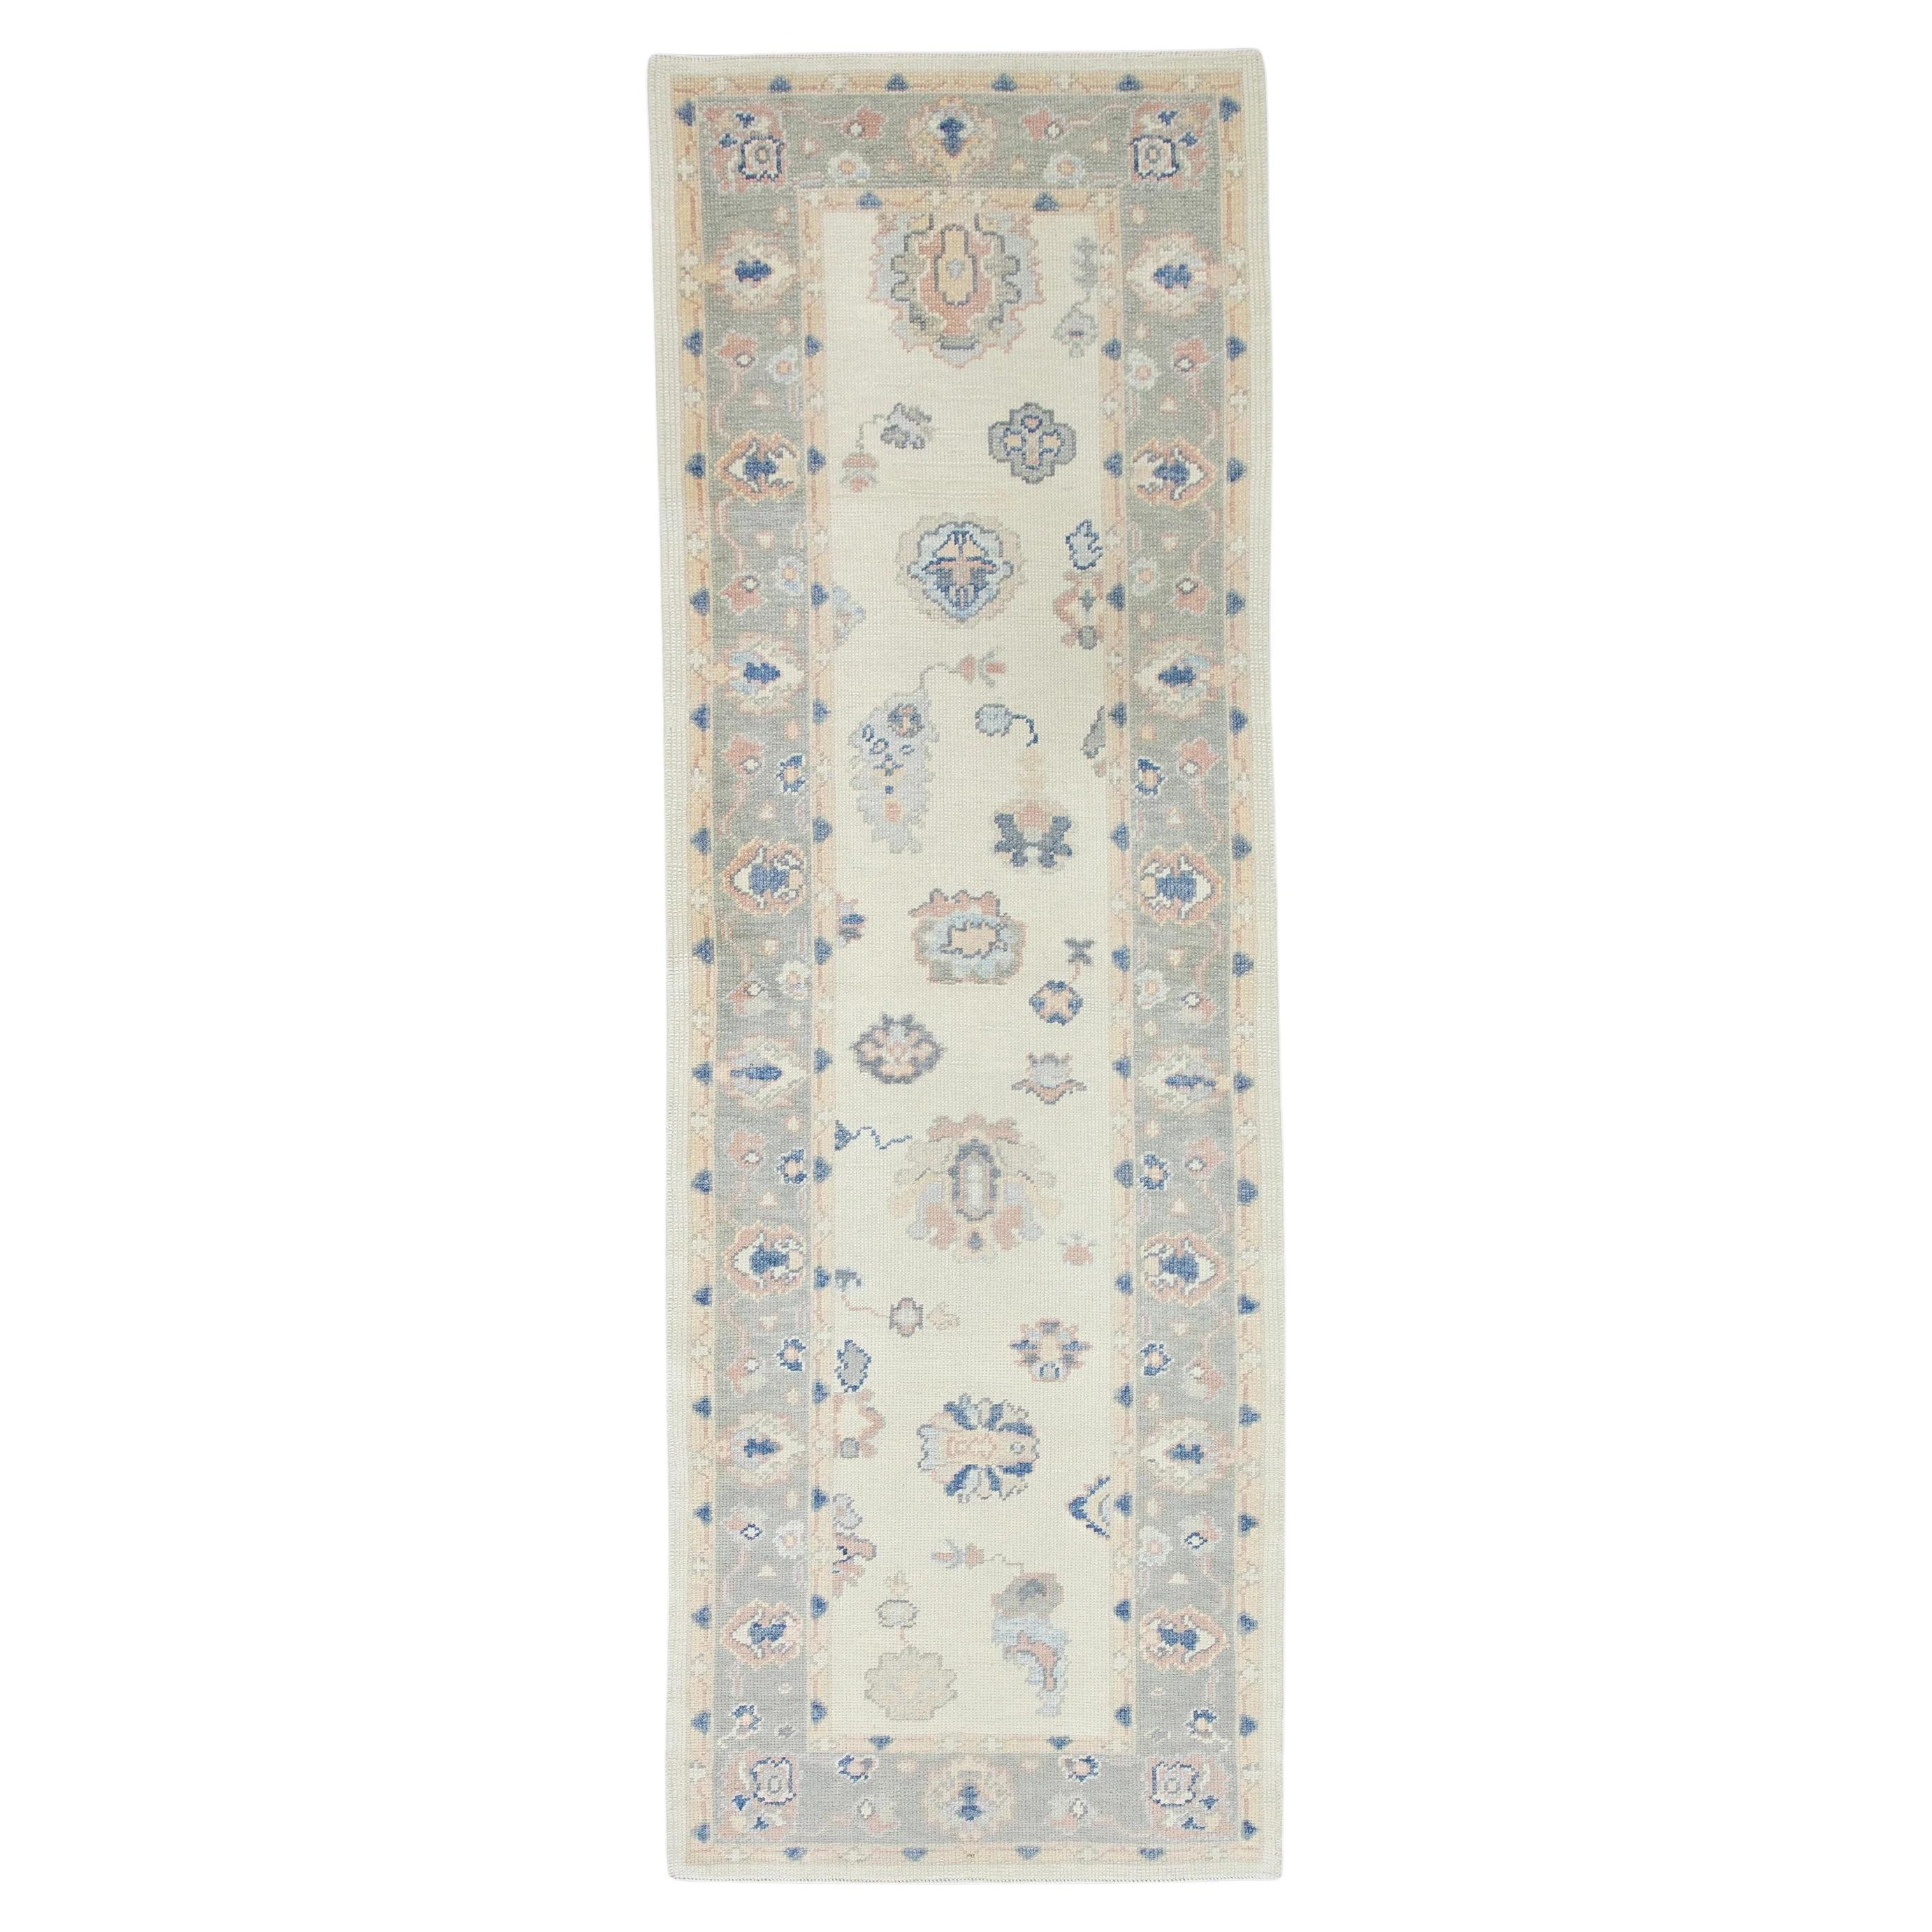 Cream Handwoven Wool Turkish Oushak Rug in Pink & Blue Floral Design 3' x 8'11" For Sale